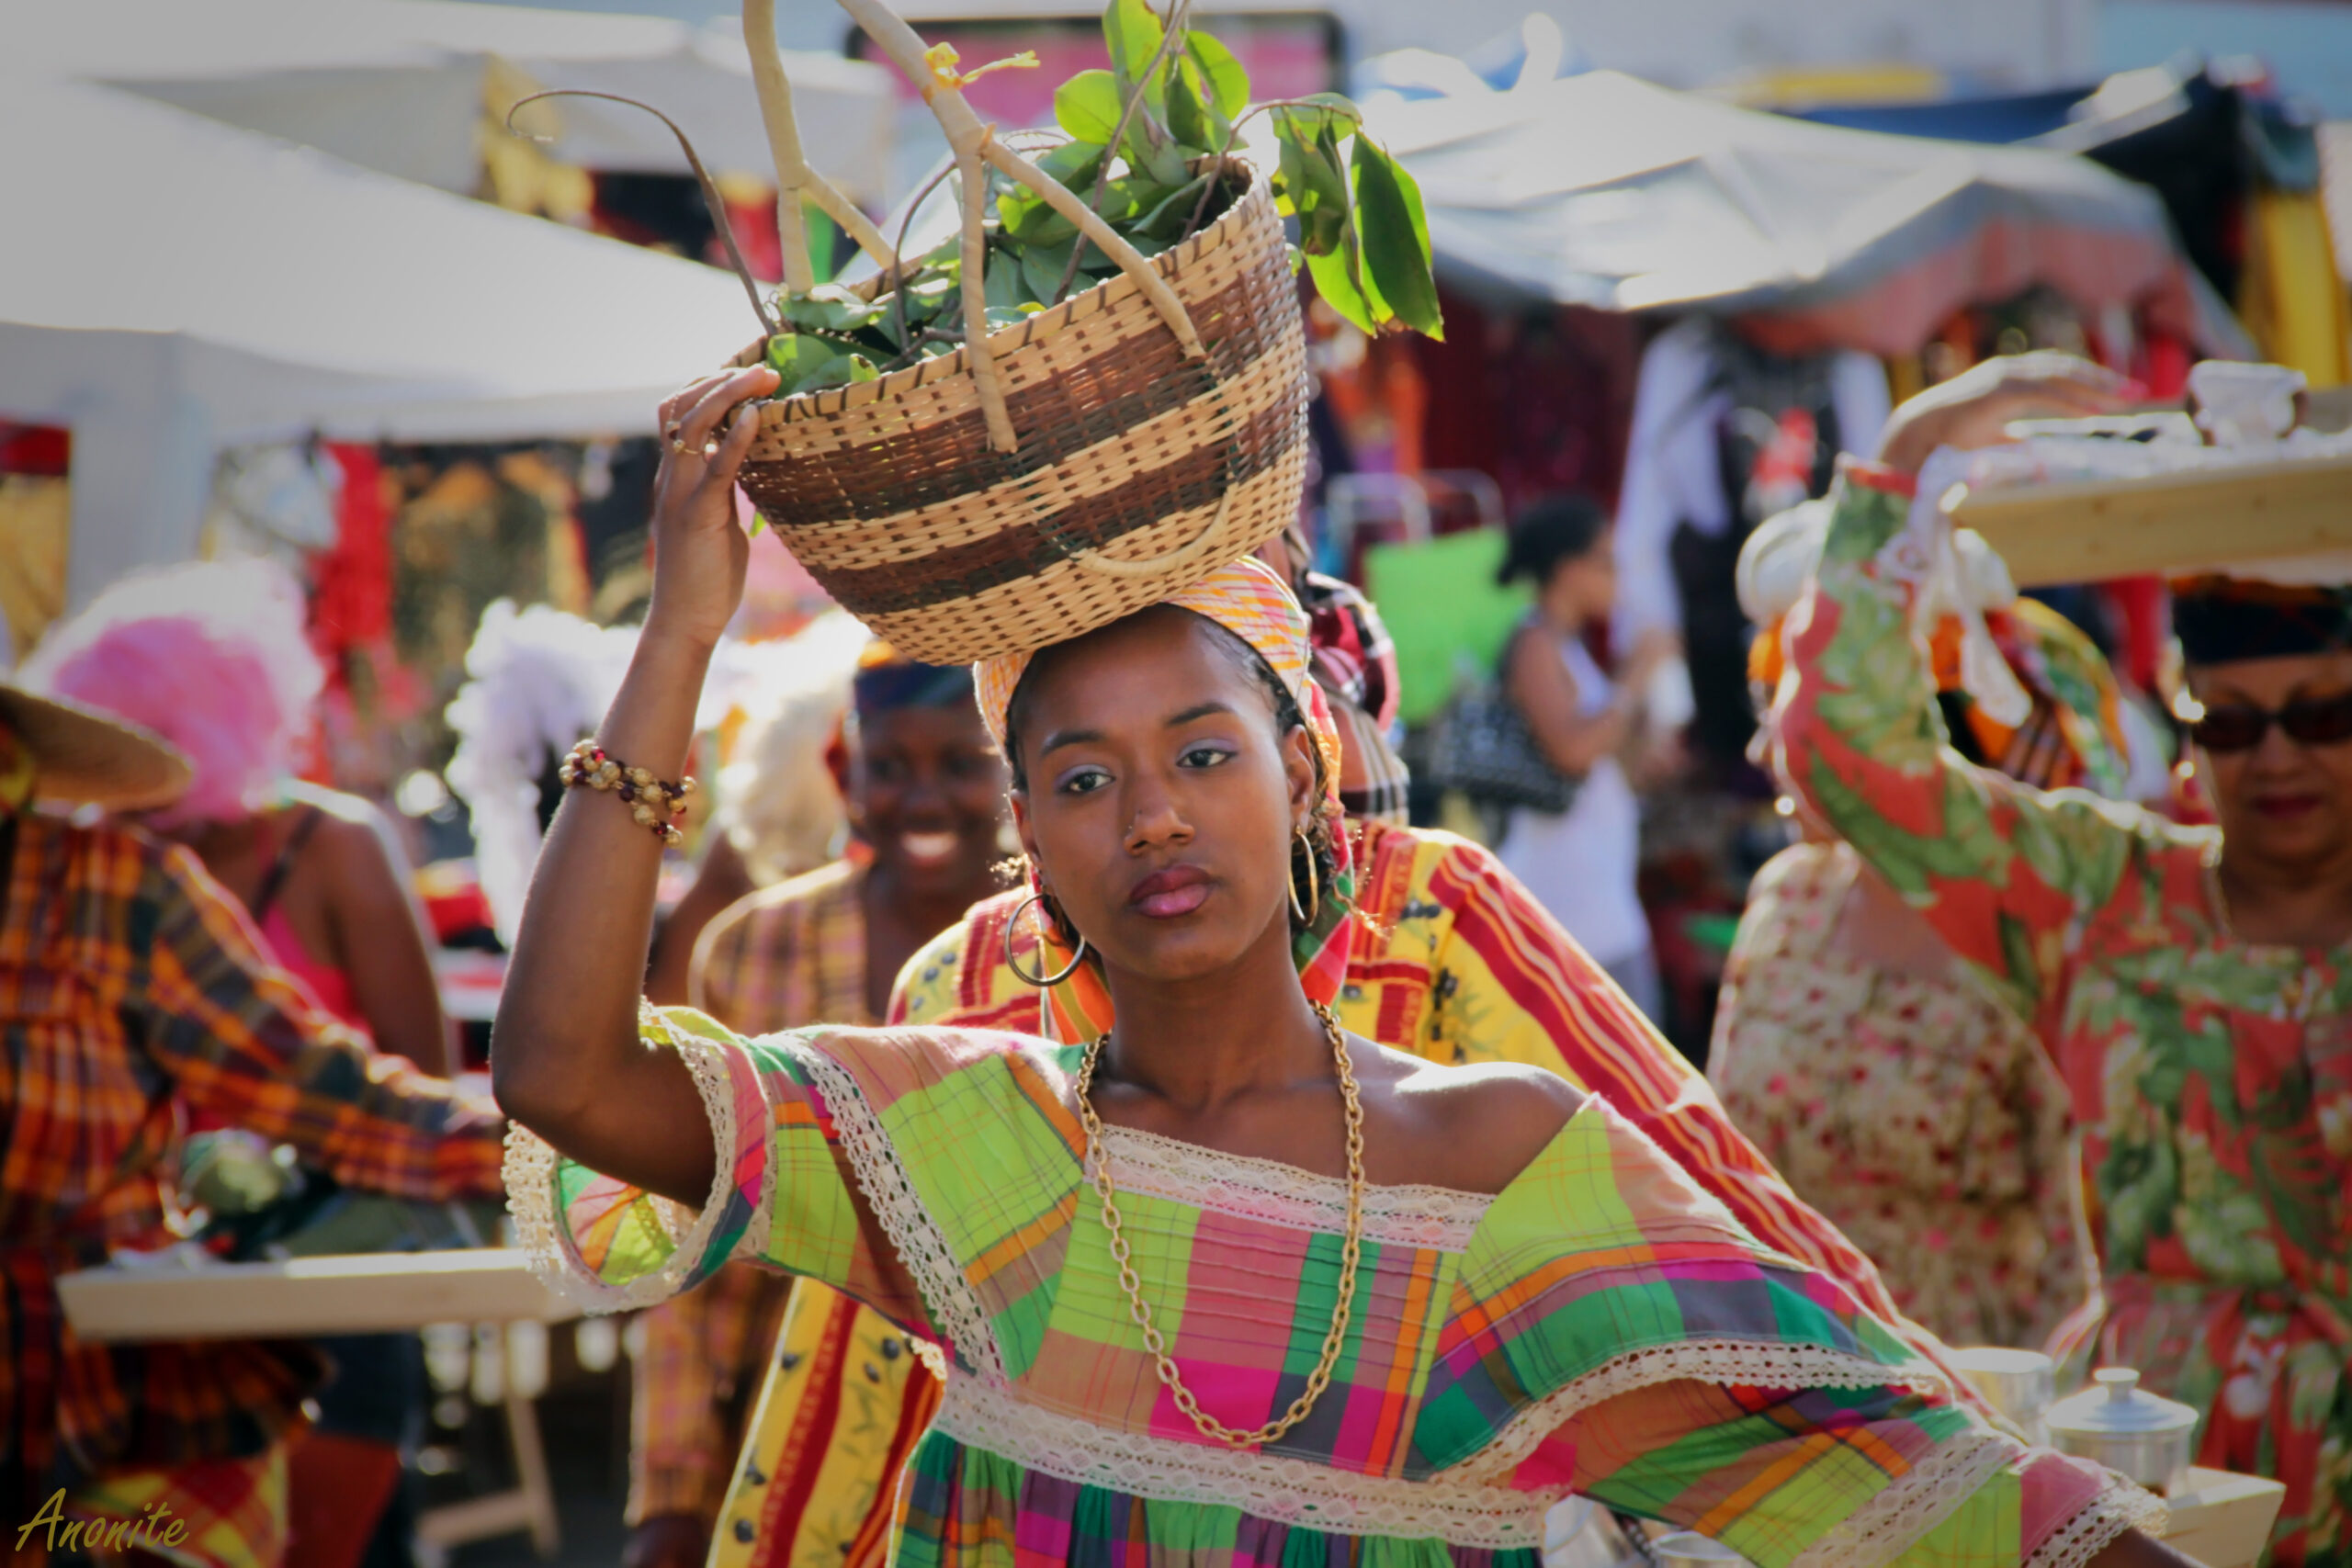 gender roles and traditions in Martinique